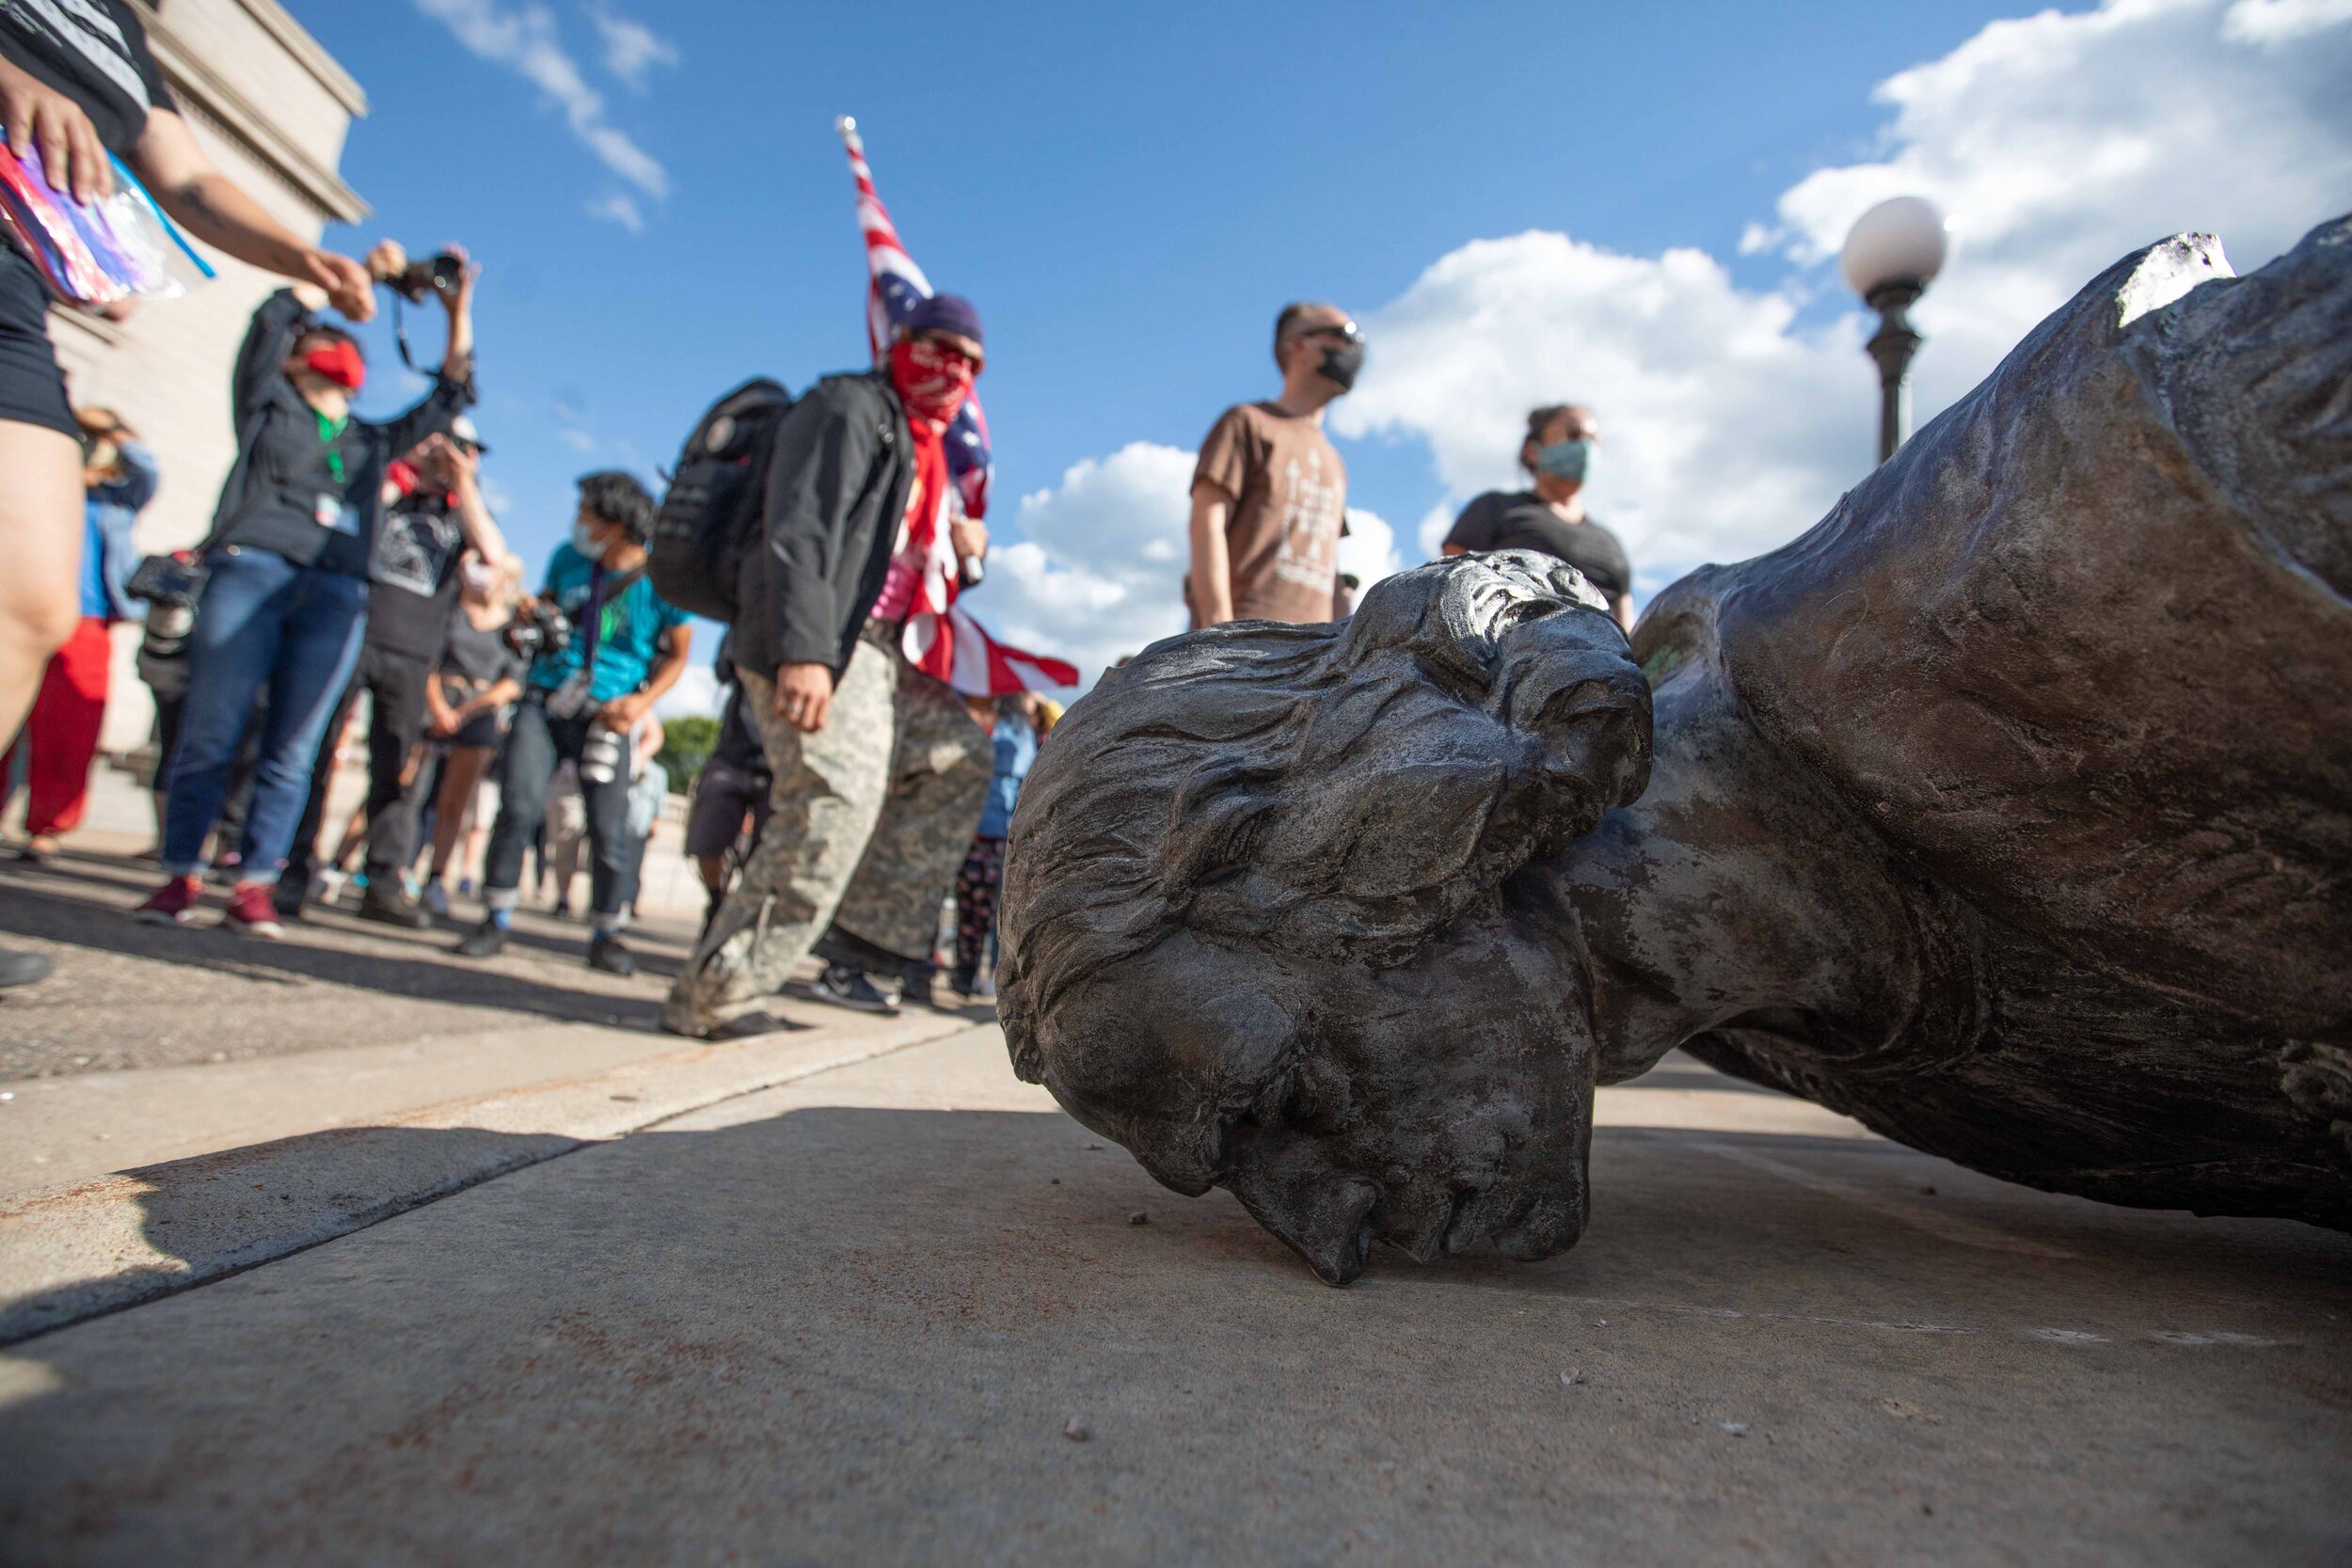  Activists hold hands and dance around the torn down Christopher Columbus statue in Saint Paul, Minnesota on Jun 10, 2020. 